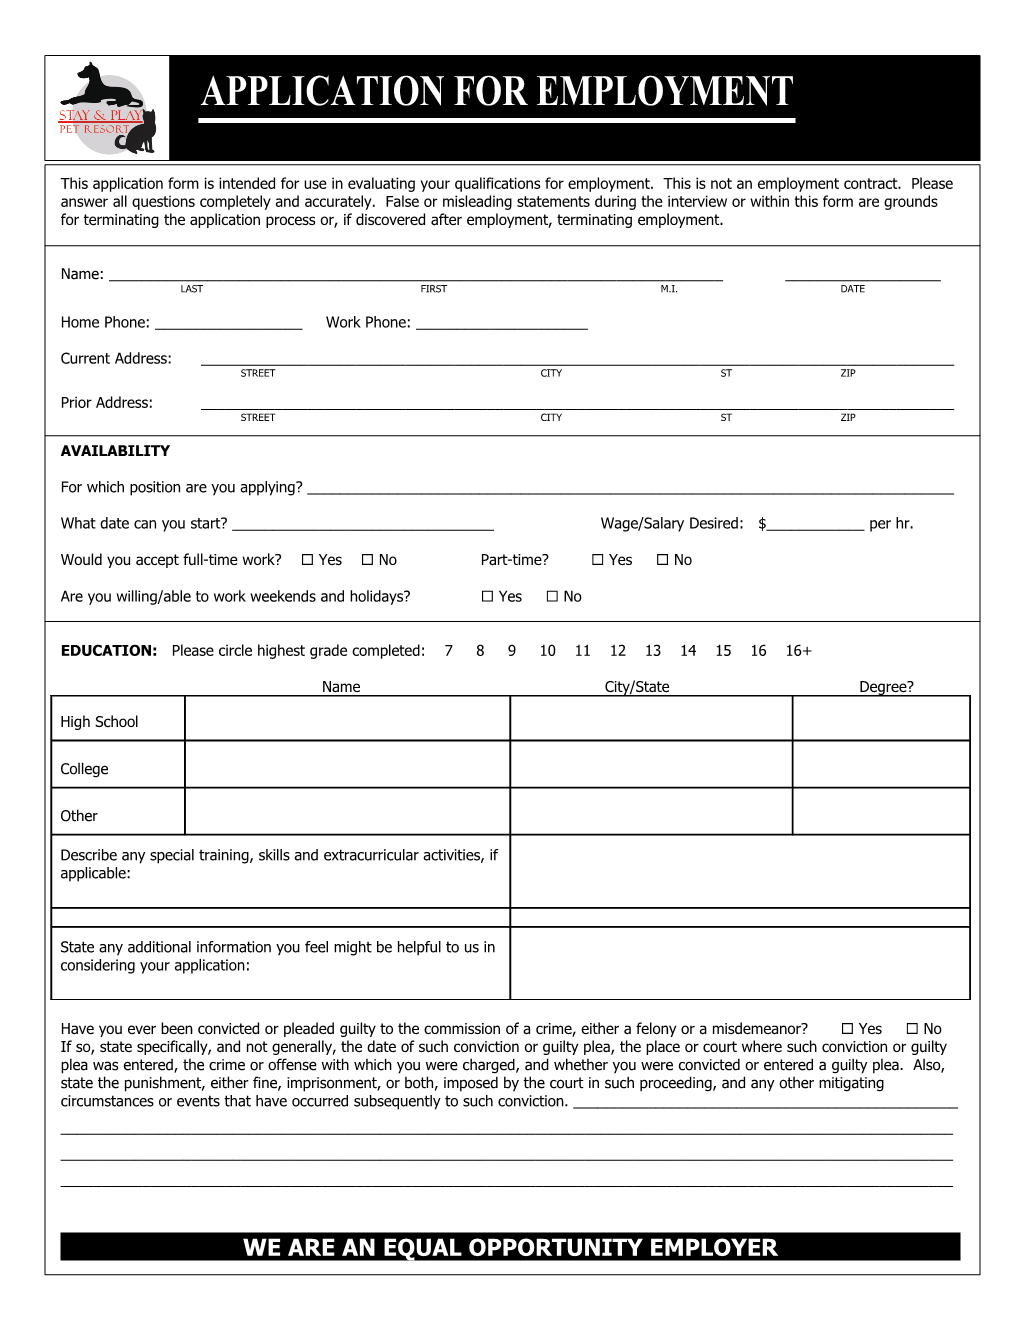 This Application Form Is Intended for Use in Evaluating Your Qualifications for Employment